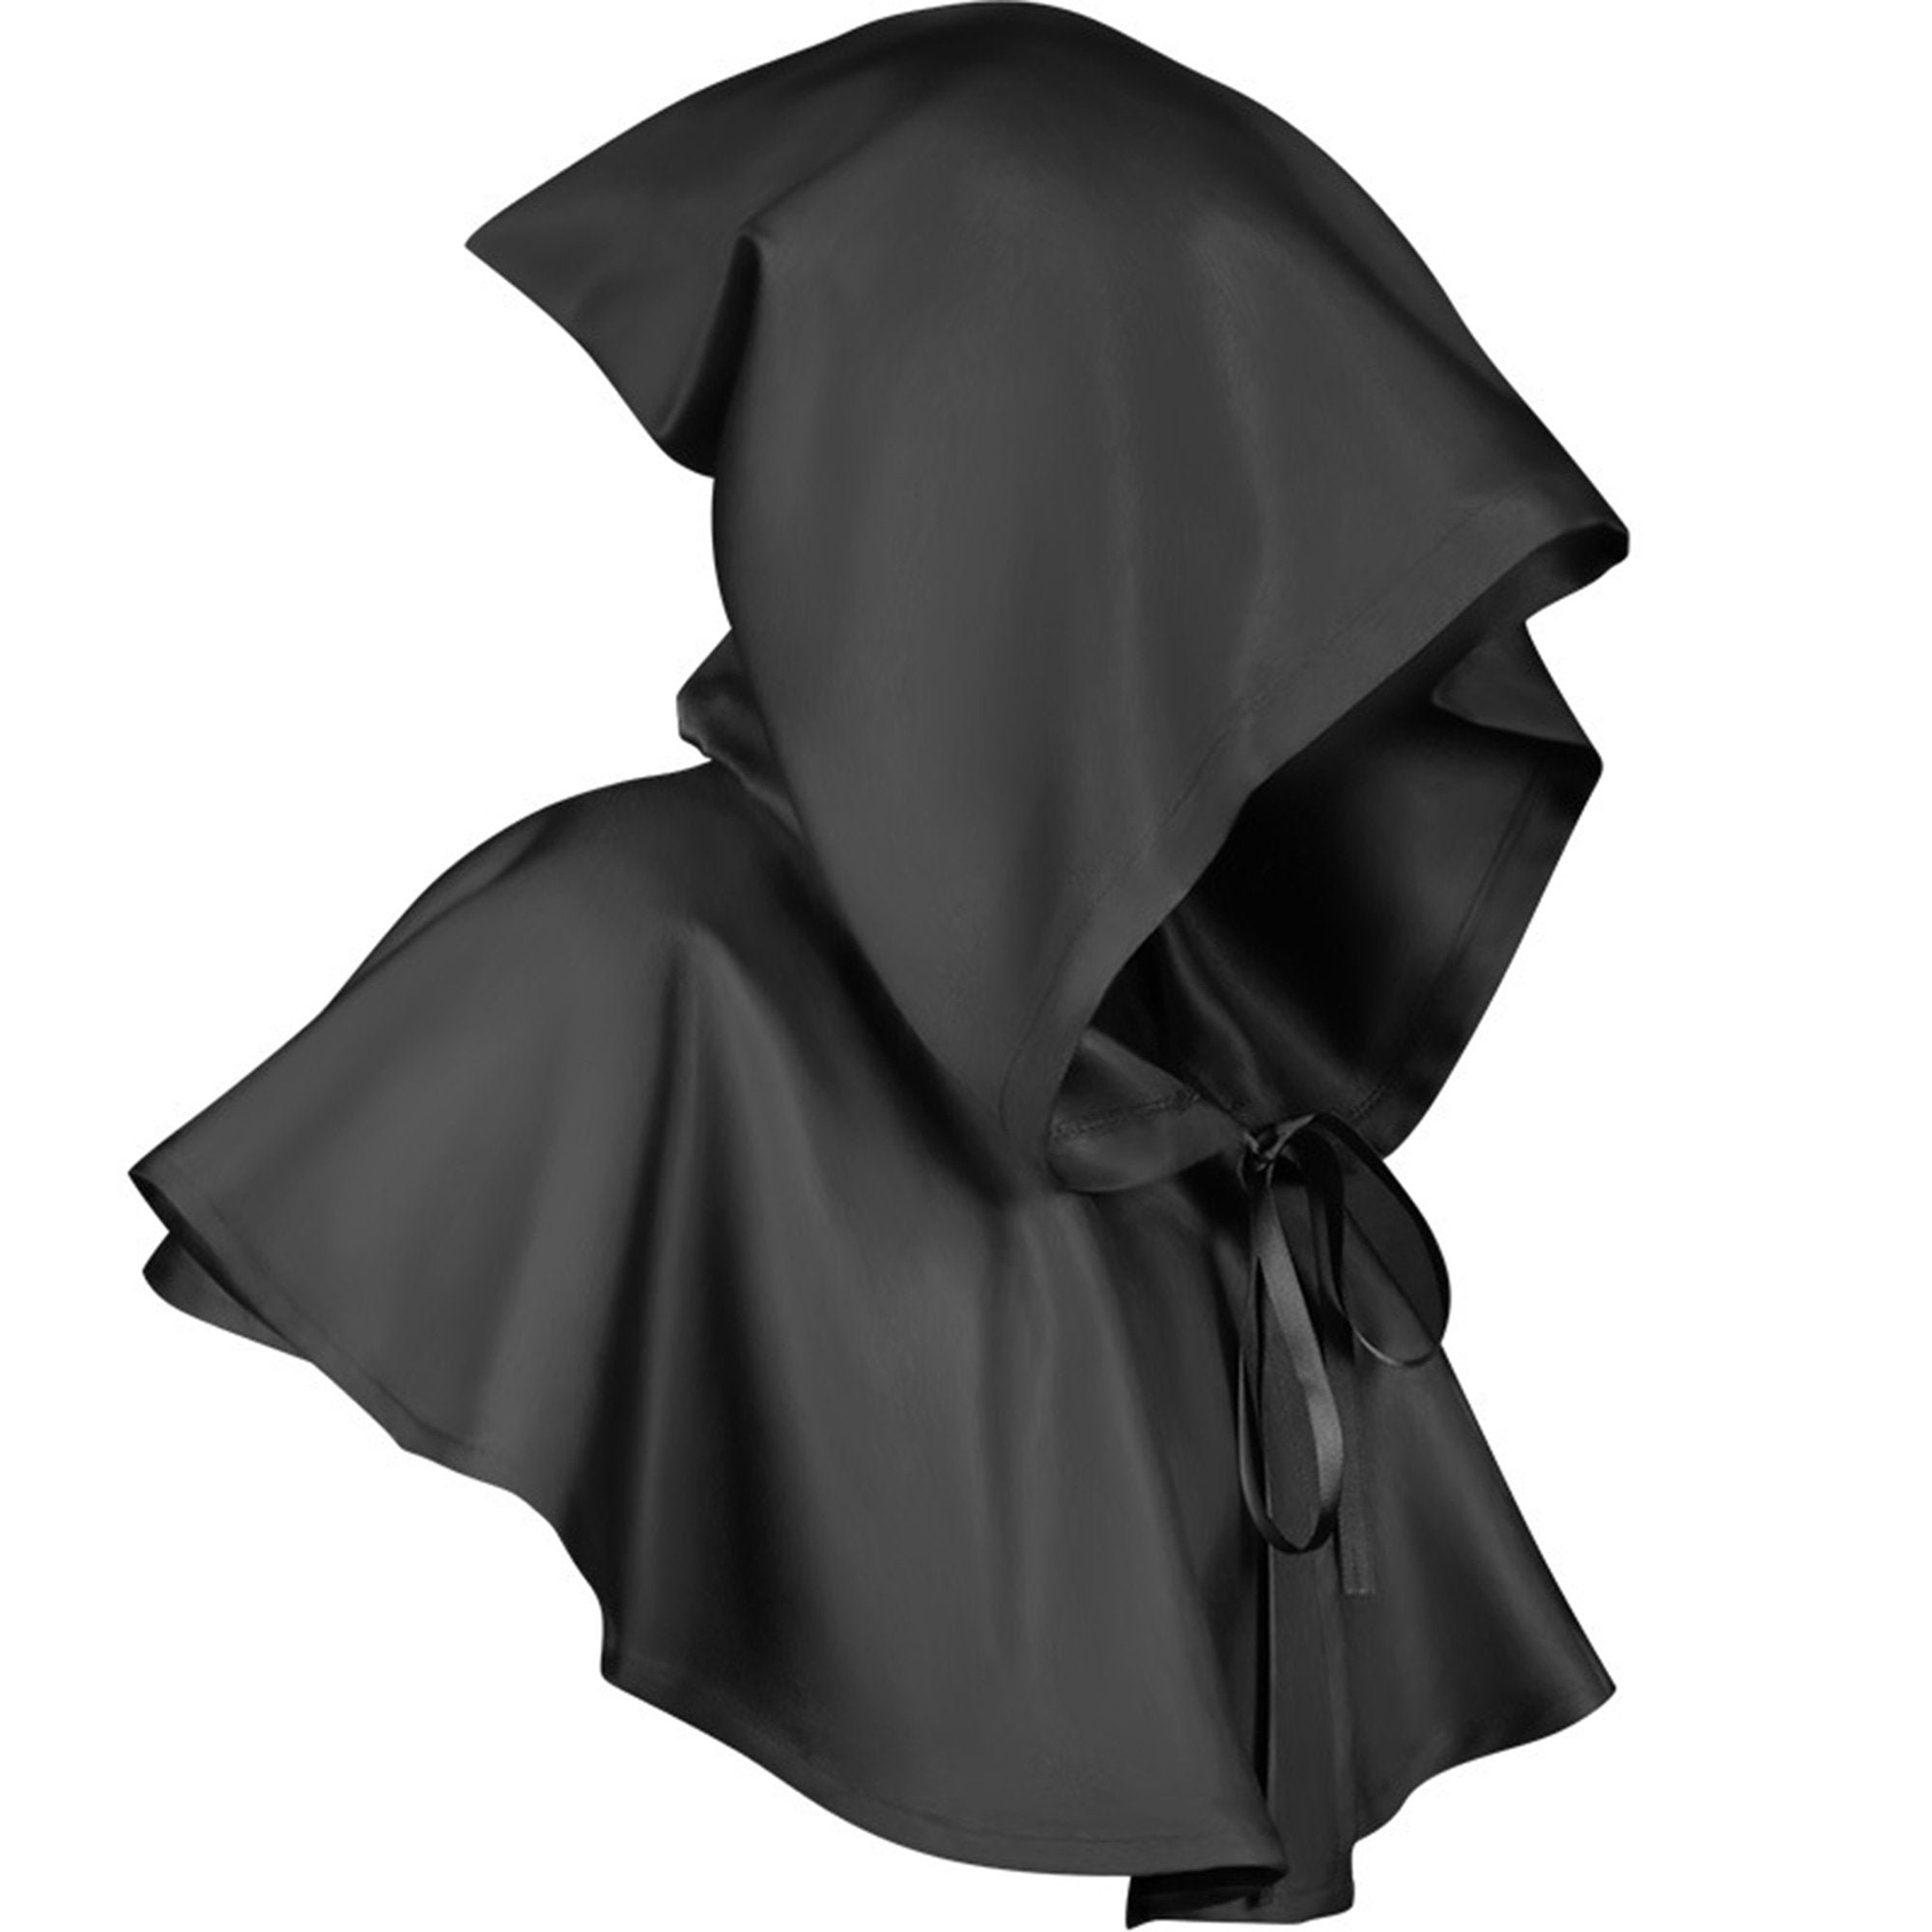 Grim Reaper Plague Doctor Punk Rogue Cowl Hood Unisex Costume For Cosplay